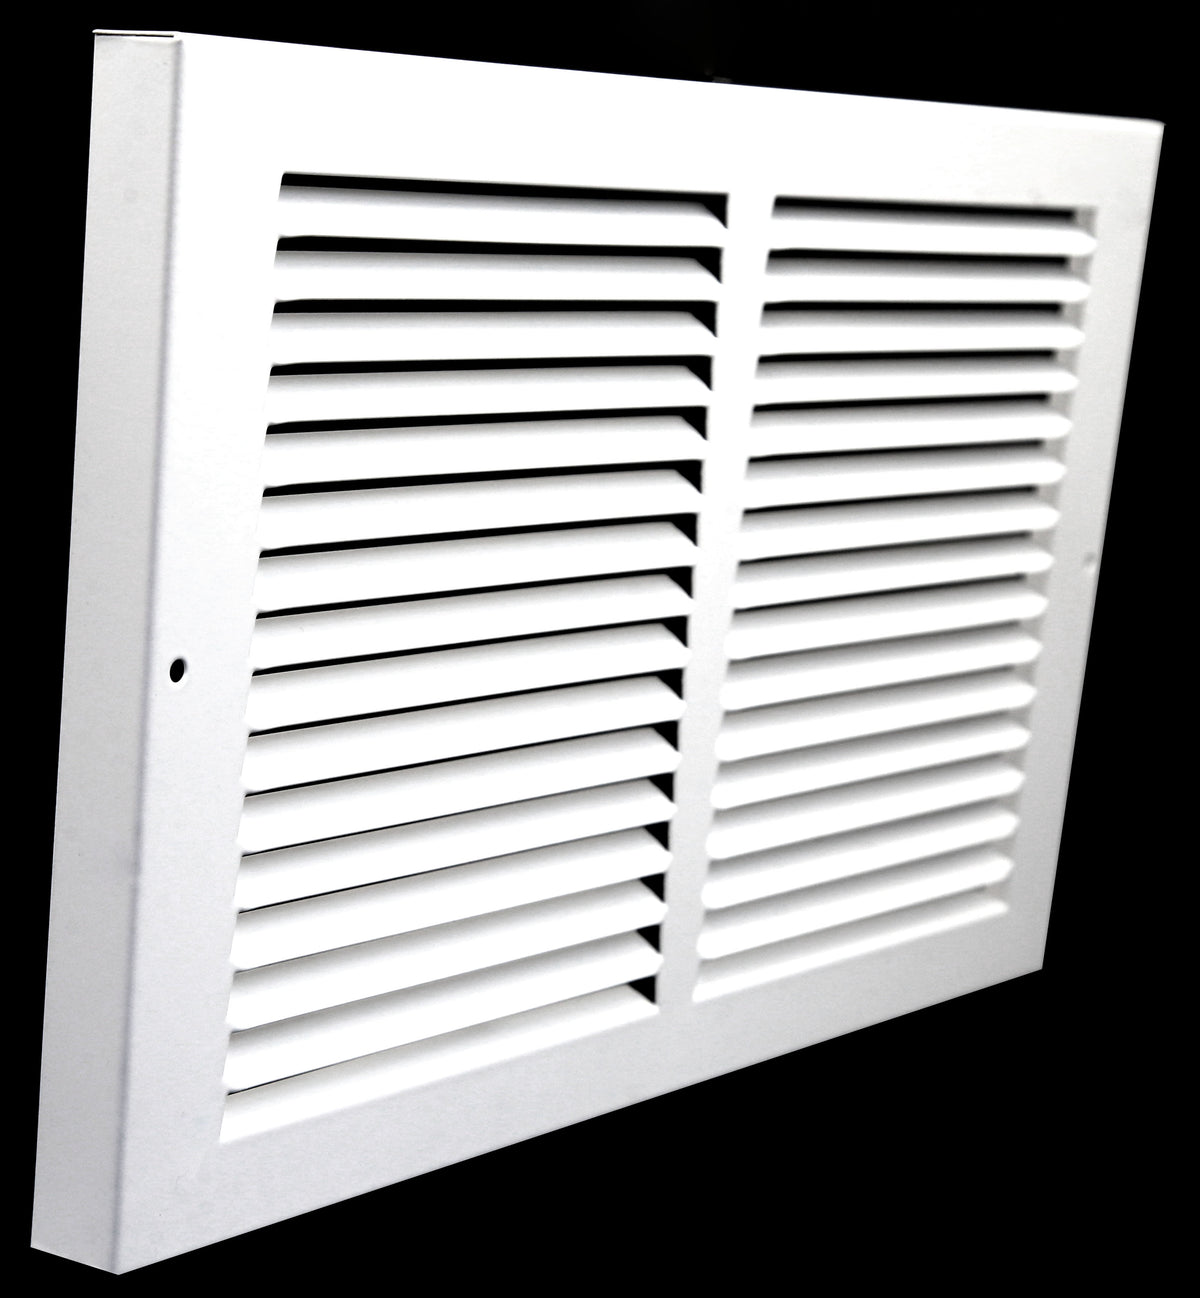 14&quot; X 14&quot; Baseboard Return Air Grille - HVAC Vent Duct Cover - 7/8&quot; Margin Turnback For Flush Fit With Baseboard Work - White